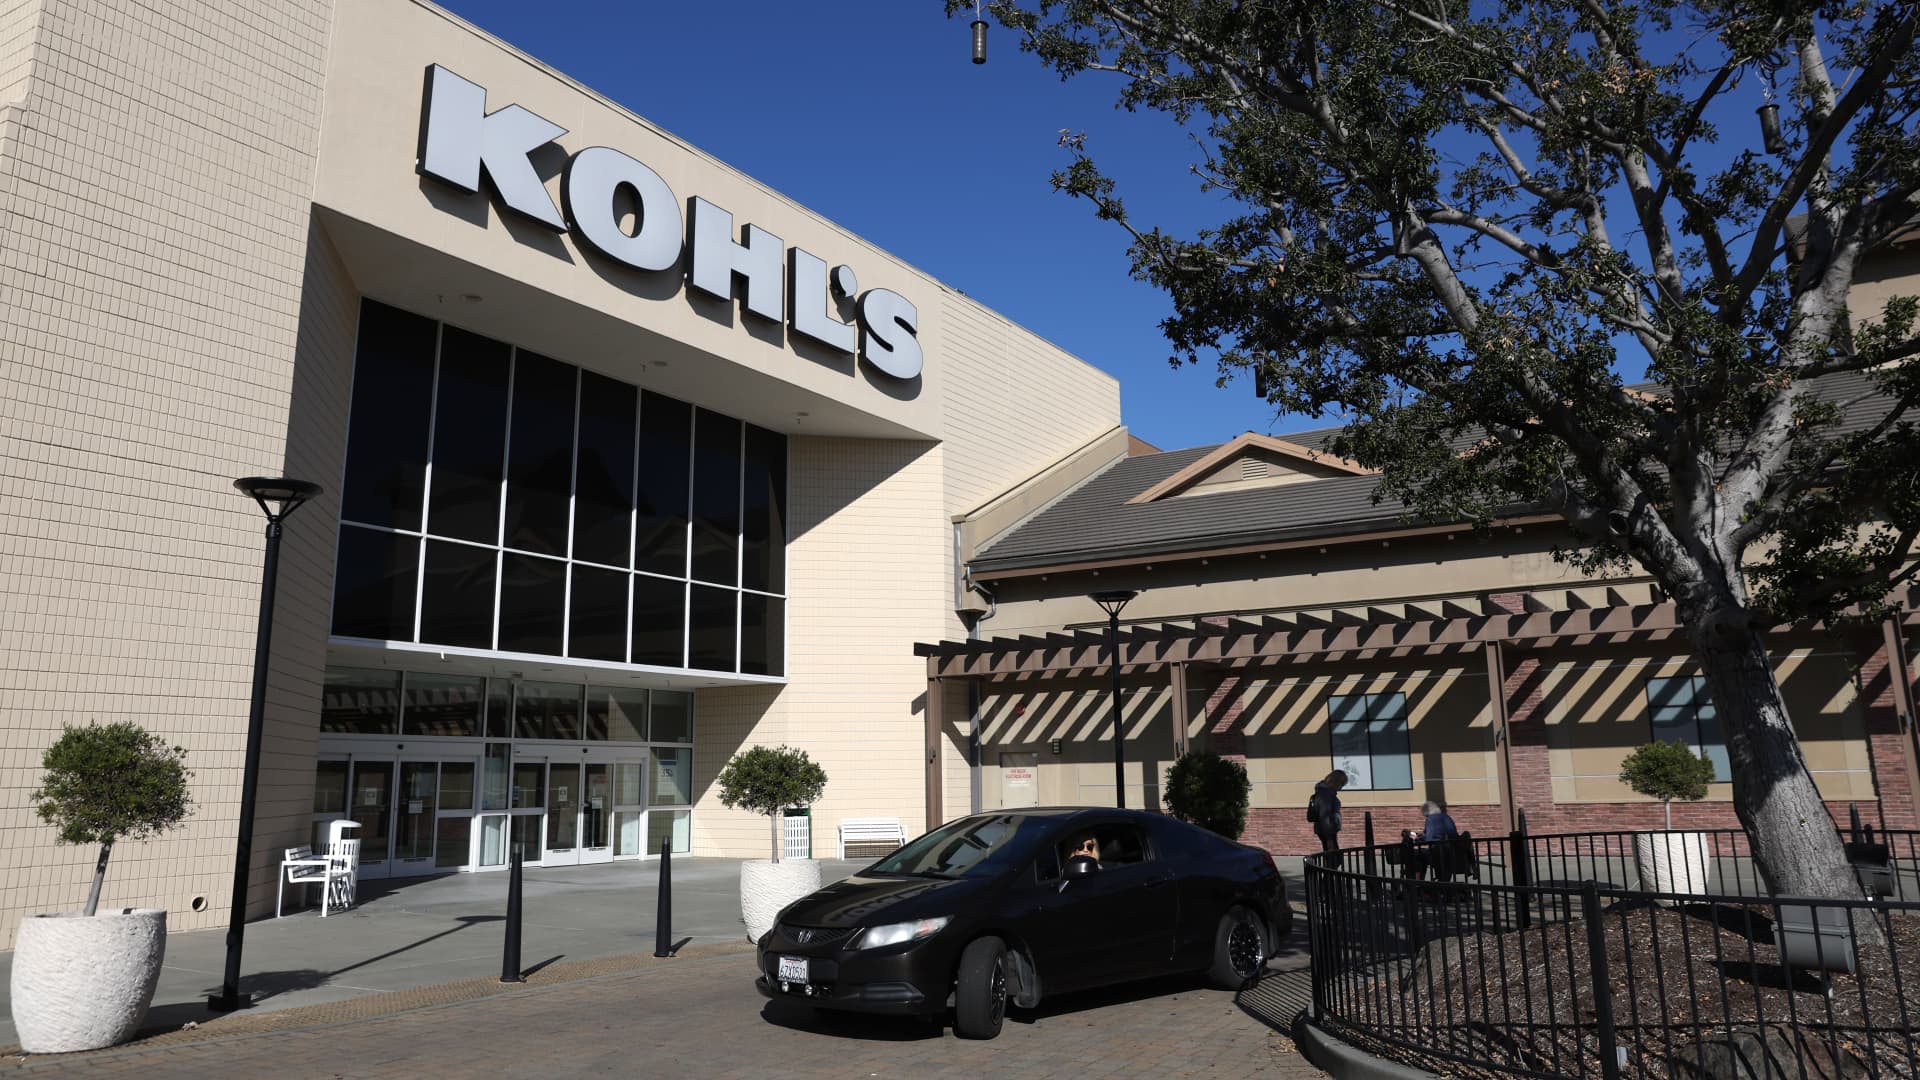 Kohl’s enters exclusive sale talks with Franchise Group